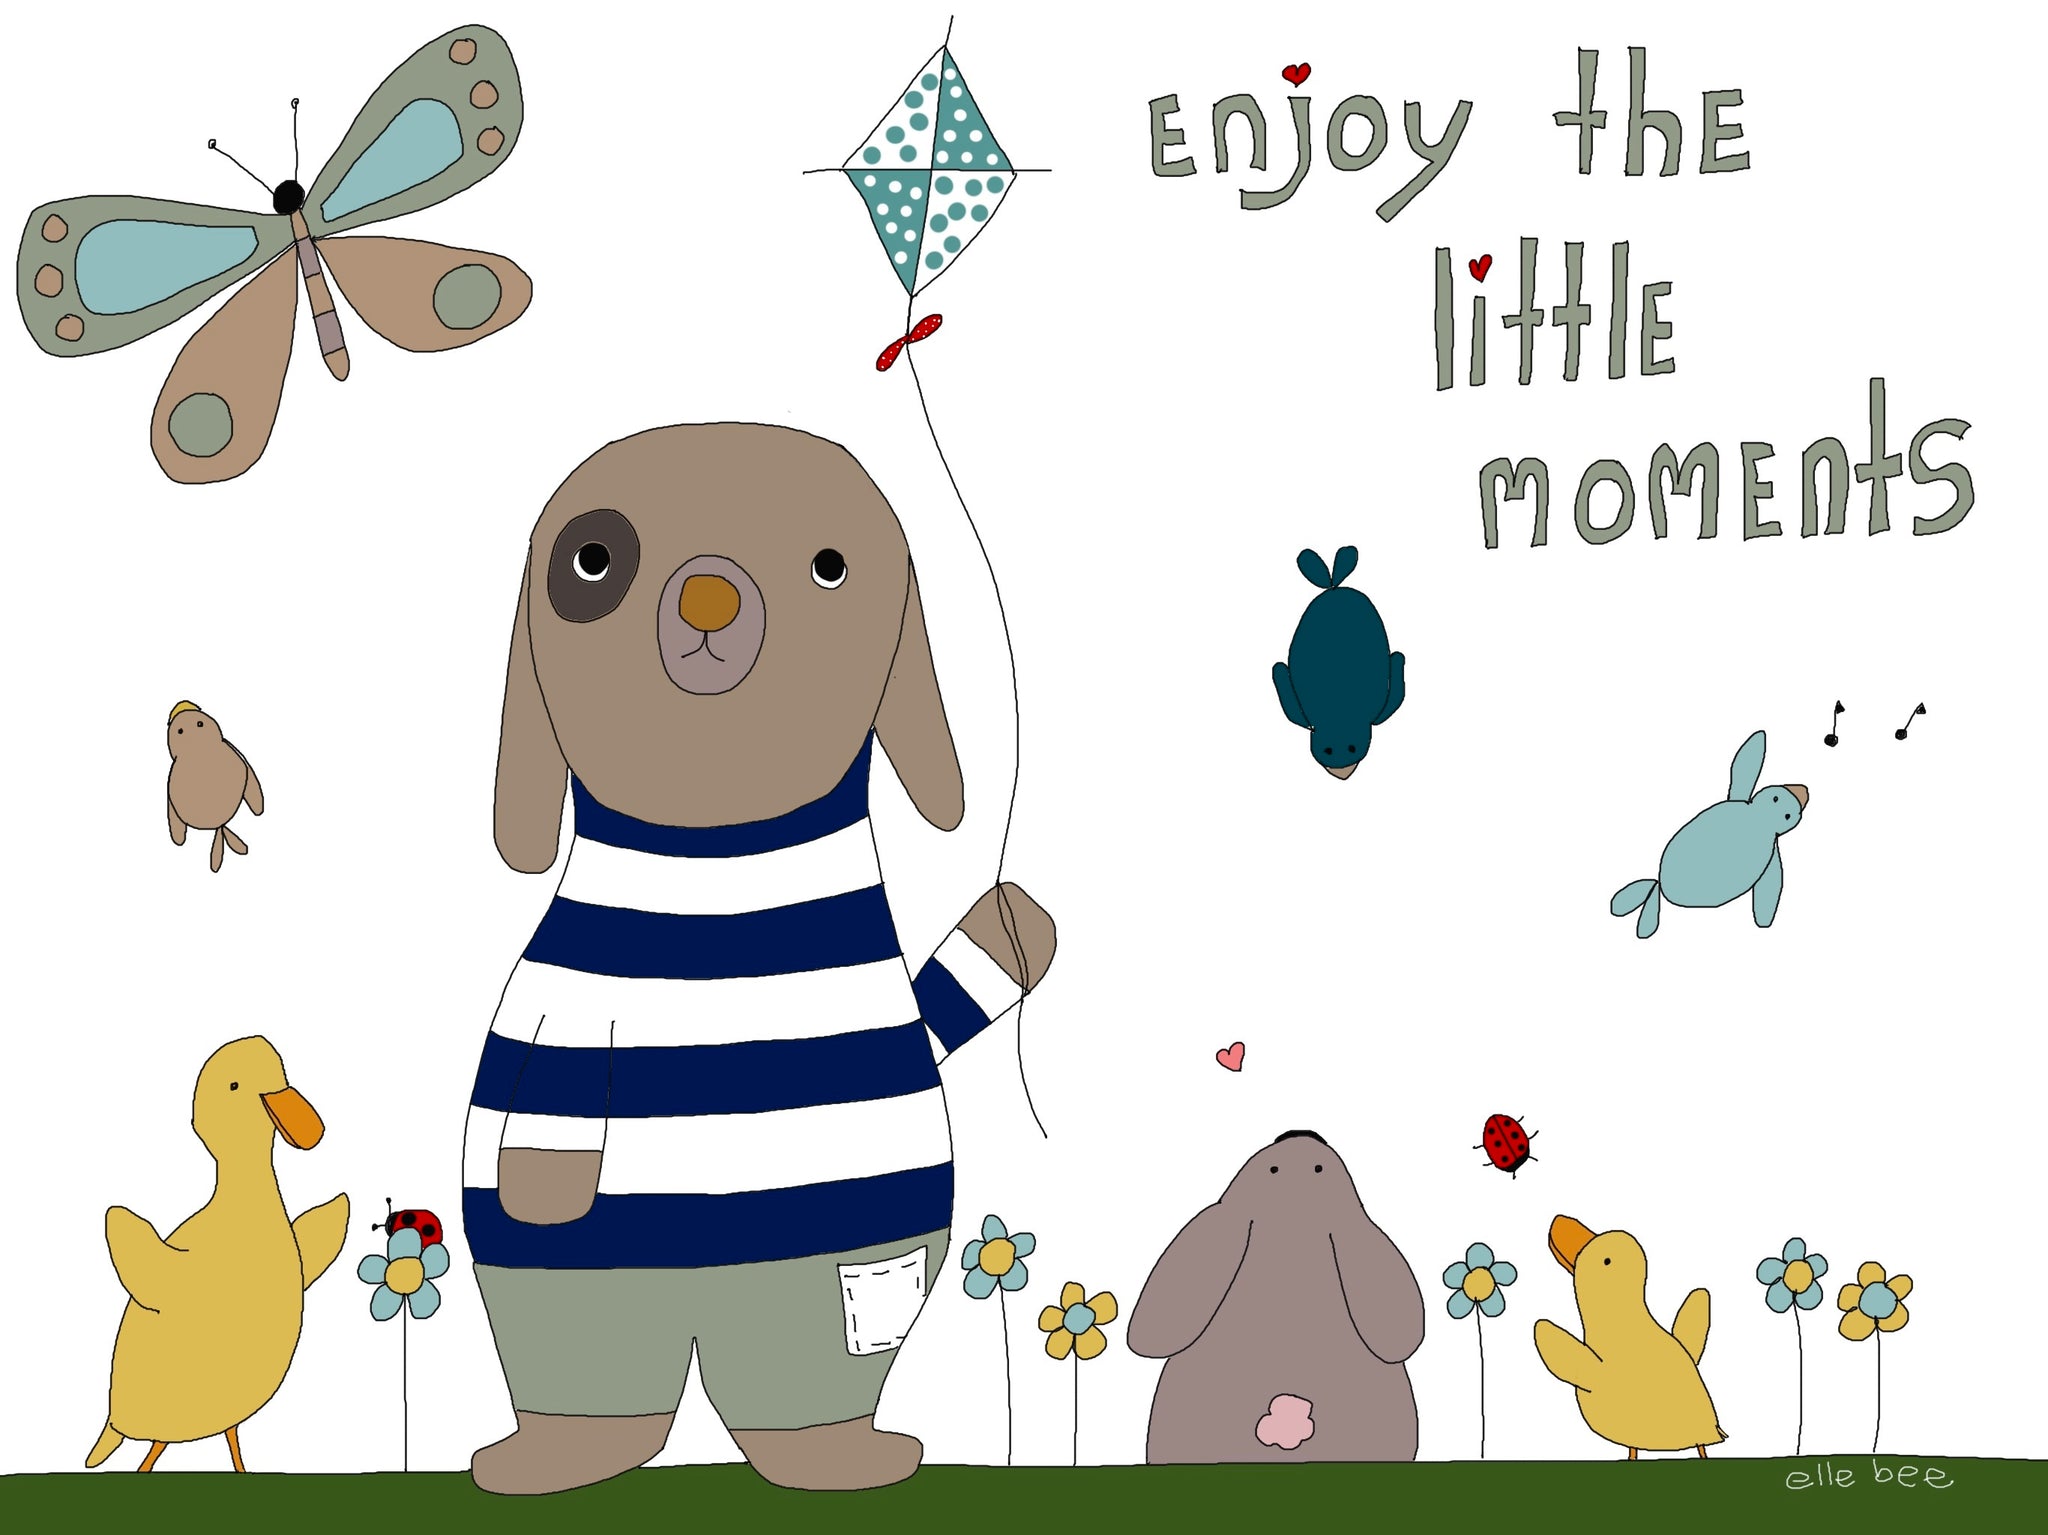 “Enjoy the little moments” greeting card